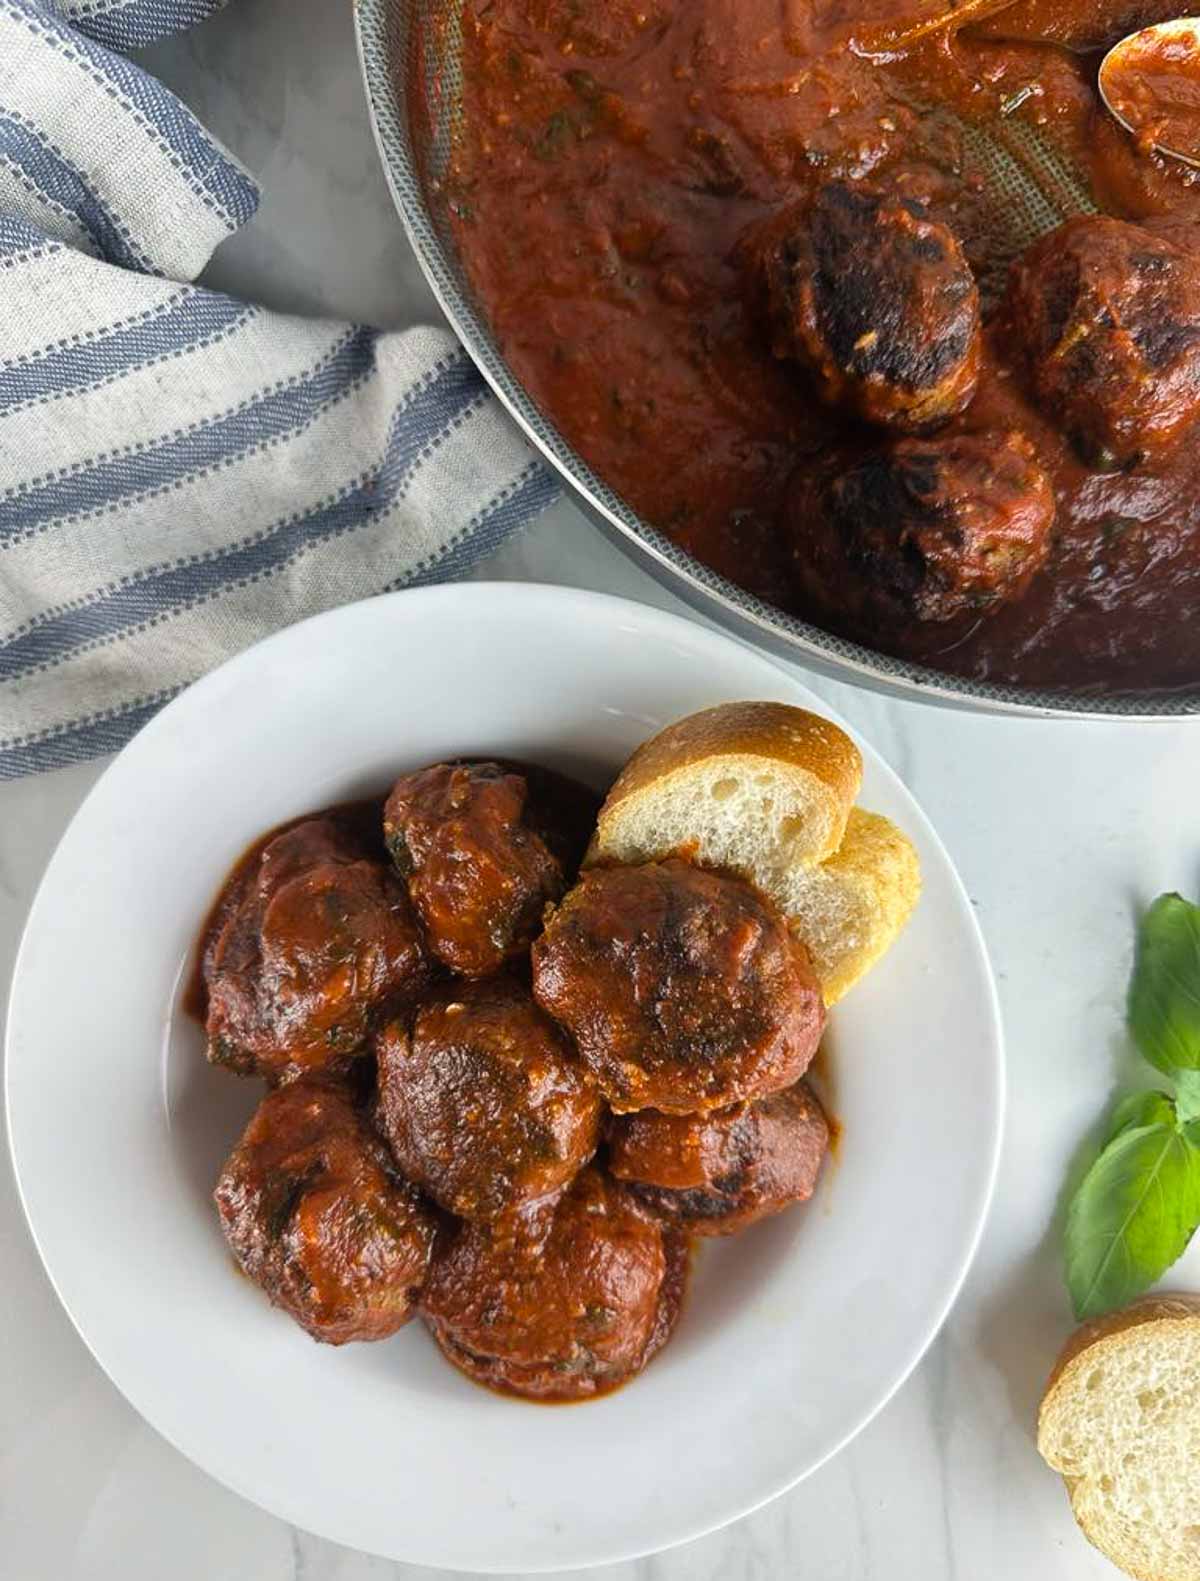 Authentic Italian meatballs are based on a recipe my Italian grandma used to make. You won't believe how easy old fashioned meatballs in tomato sauce are to make. Once you make them, you'll never go back to store-bought meatballs again!